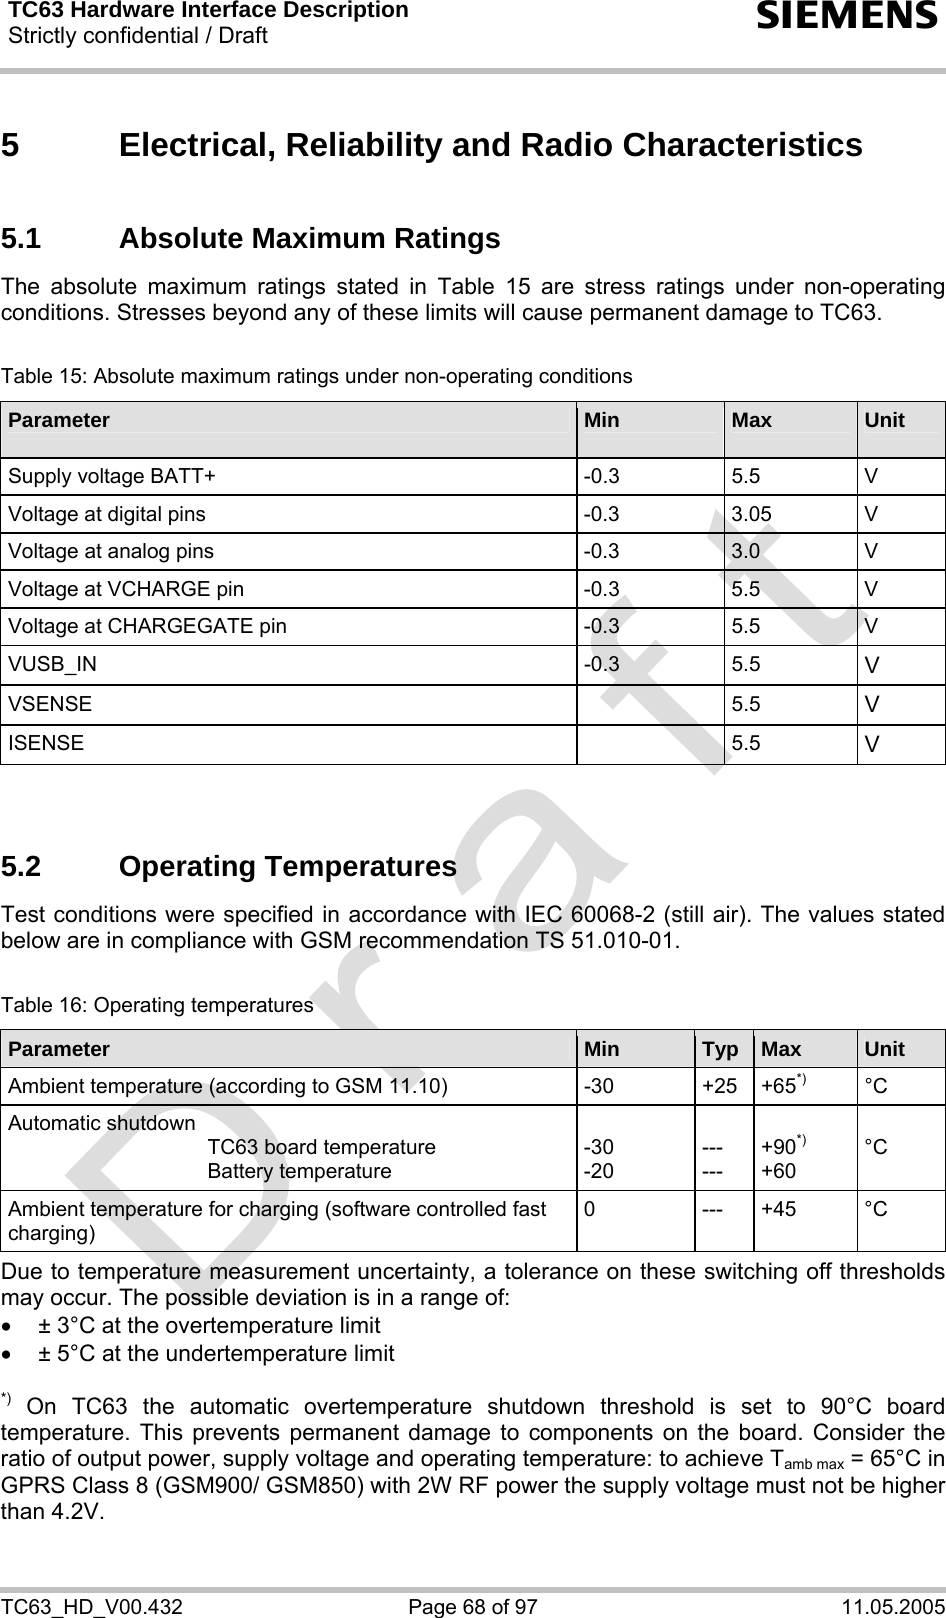 TC63 Hardware Interface Description Strictly confidential / Draft  s TC63_HD_V00.432  Page 68 of 97  11.05.2005 5  Electrical, Reliability and Radio Characteristics 5.1  Absolute Maximum Ratings The absolute maximum ratings stated in Table 15 are stress ratings under non-operating conditions. Stresses beyond any of these limits will cause permanent damage to TC63.   Table 15: Absolute maximum ratings under non-operating conditions Parameter  Min  Max  Unit Supply voltage BATT+  -0.3  5.5  V Voltage at digital pins   -0.3  3.05   V Voltage at analog pins   -0.3  3.0  V Voltage at VCHARGE pin  -0.3  5.5  V Voltage at CHARGEGATE pin  -0.3  5.5  V VUSB_IN -0.3 5.5 V VSENSE  5.5 V ISENSE  5.5 V   5.2 Operating Temperatures Test conditions were specified in accordance with IEC 60068-2 (still air). The values stated below are in compliance with GSM recommendation TS 51.010-01.  Table 16: Operating temperatures Parameter  Min  Typ  Max  Unit Ambient temperature (according to GSM 11.10)  -30  +25  +65*) °C Automatic shutdown   TC63 board temperature   Battery temperature  -30 -20  --- ---  +90*) +60  °C Ambient temperature for charging (software controlled fast charging) 0 --- +45 °C Due to temperature measurement uncertainty, a tolerance on these switching off thresholds may occur. The possible deviation is in a range of: •  ± 3°C at the overtemperature limit •  ± 5°C at the undertemperature limit  *) On TC63 the automatic overtemperature shutdown threshold is set to 90°C board temperature. This prevents permanent damage to components on the board. Consider the ratio of output power, supply voltage and operating temperature: to achieve Tamb max = 65°C in GPRS Class 8 (GSM900/ GSM850) with 2W RF power the supply voltage must not be higher than 4.2V. 